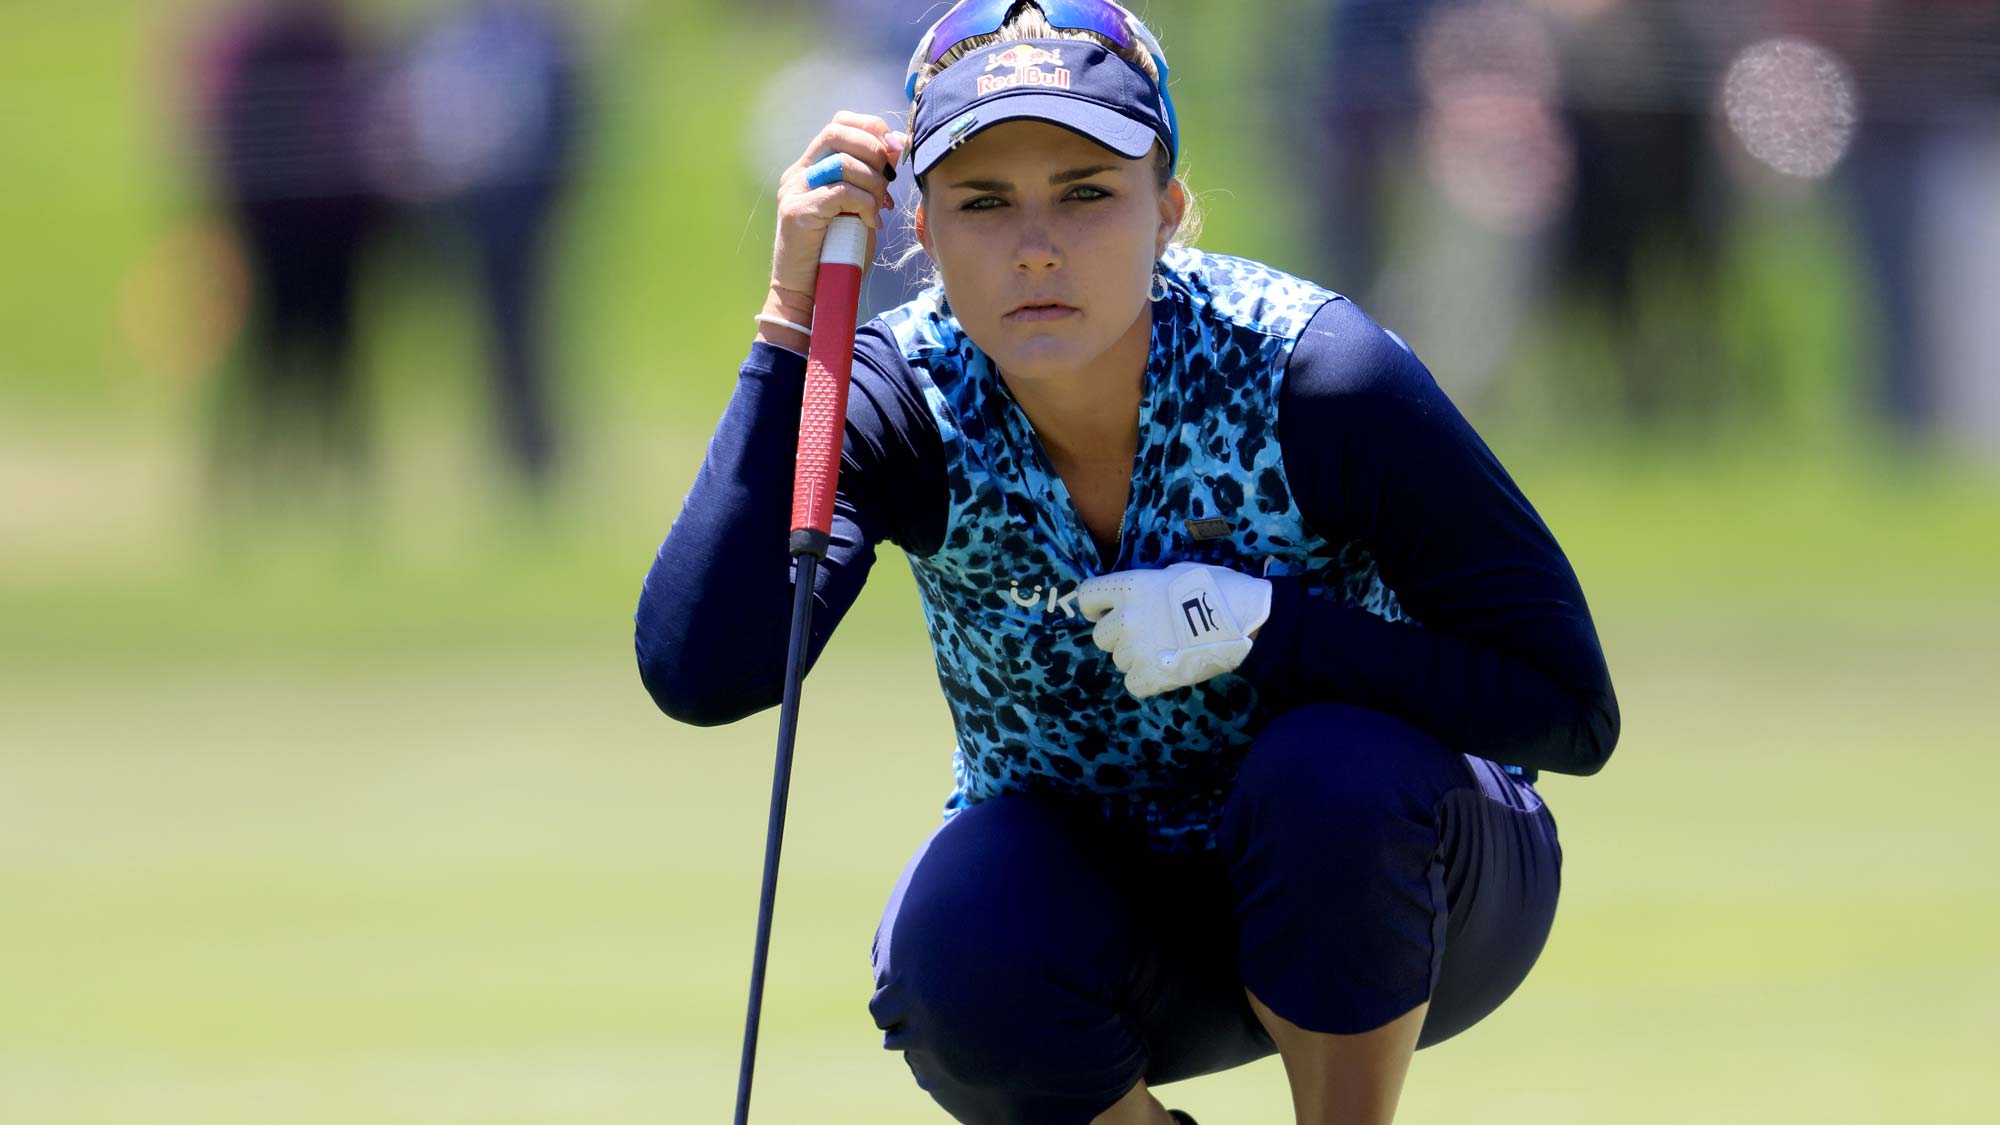 Lexi Thompson of the United States lines up her putt on the 10th hole during the final round of the 76th U.S. Women's Open Championship